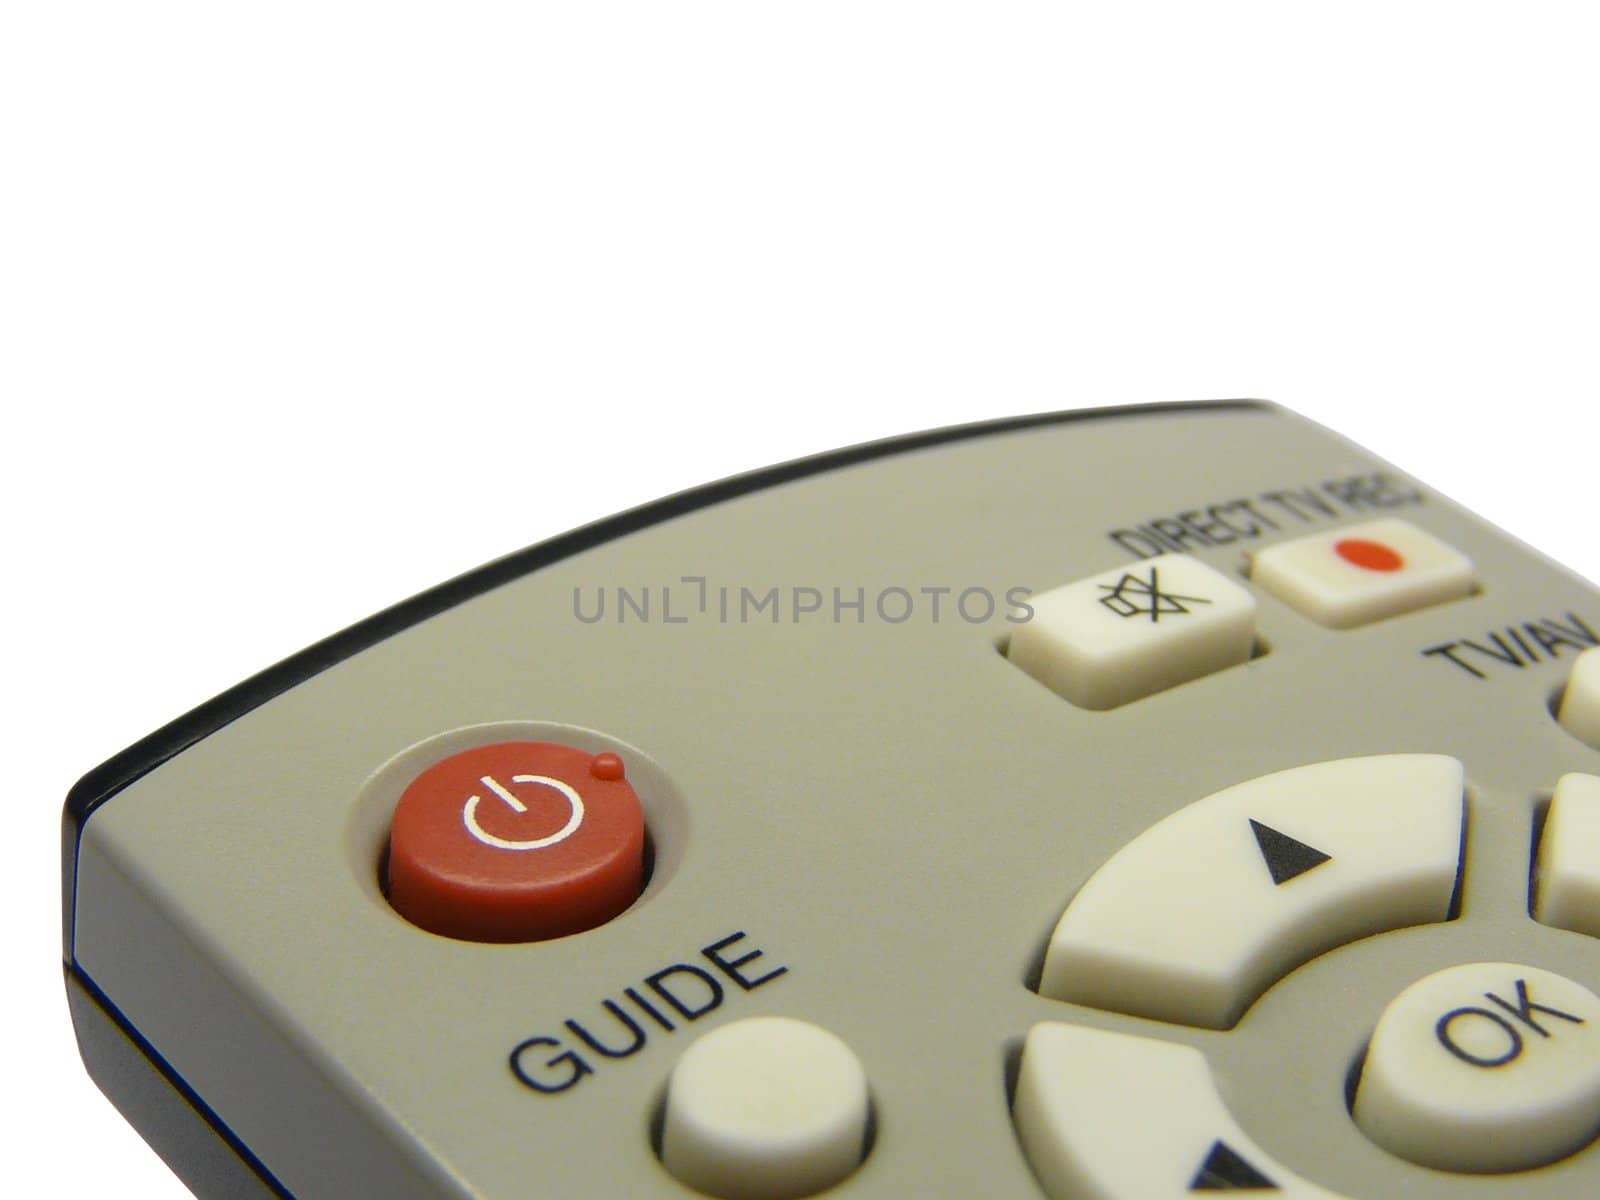 Isolated remote control on the white background